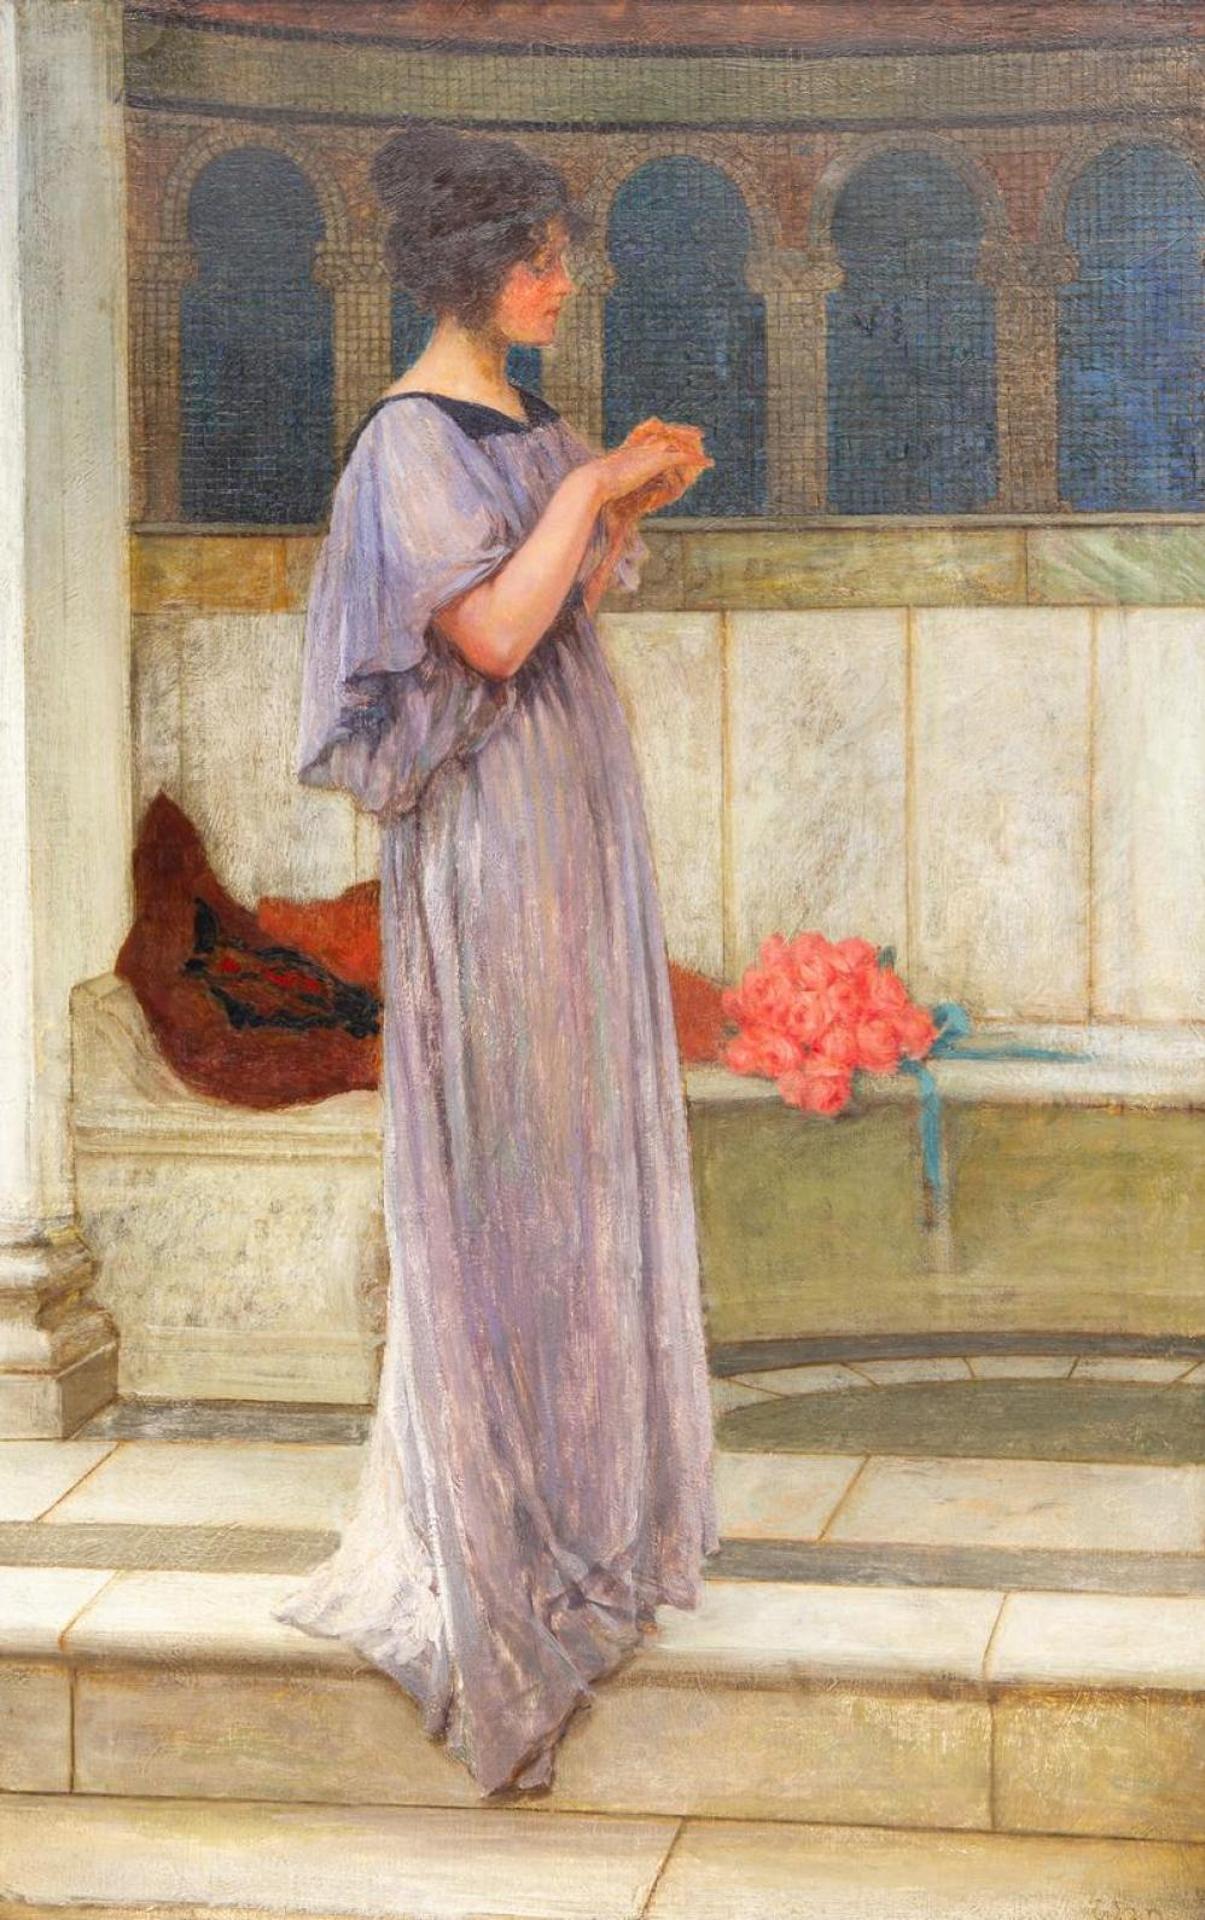 William H. Margetson (1861-1940) - Loves Talisman